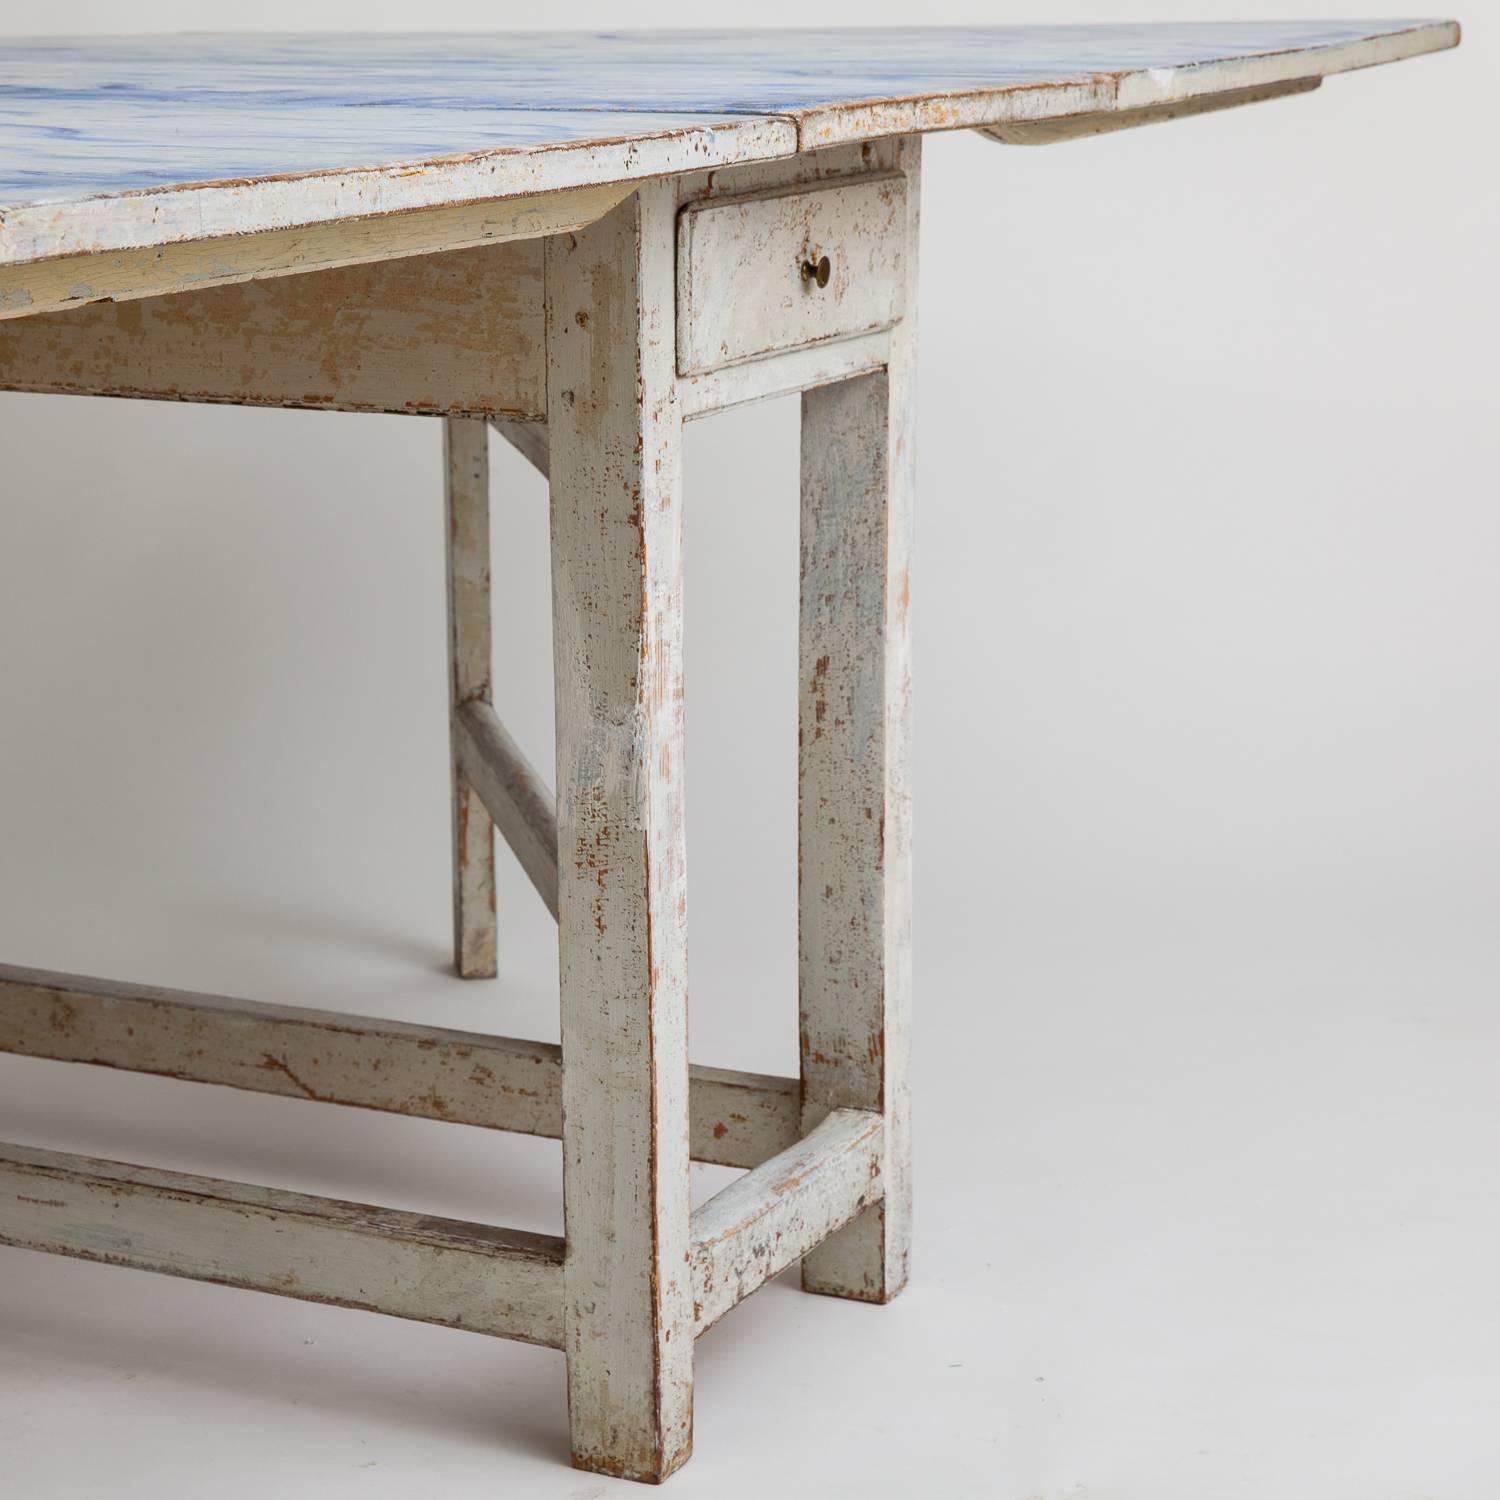 Wood Swedish Blue and White Original Painted Drop-Leaf Table, circa 1820